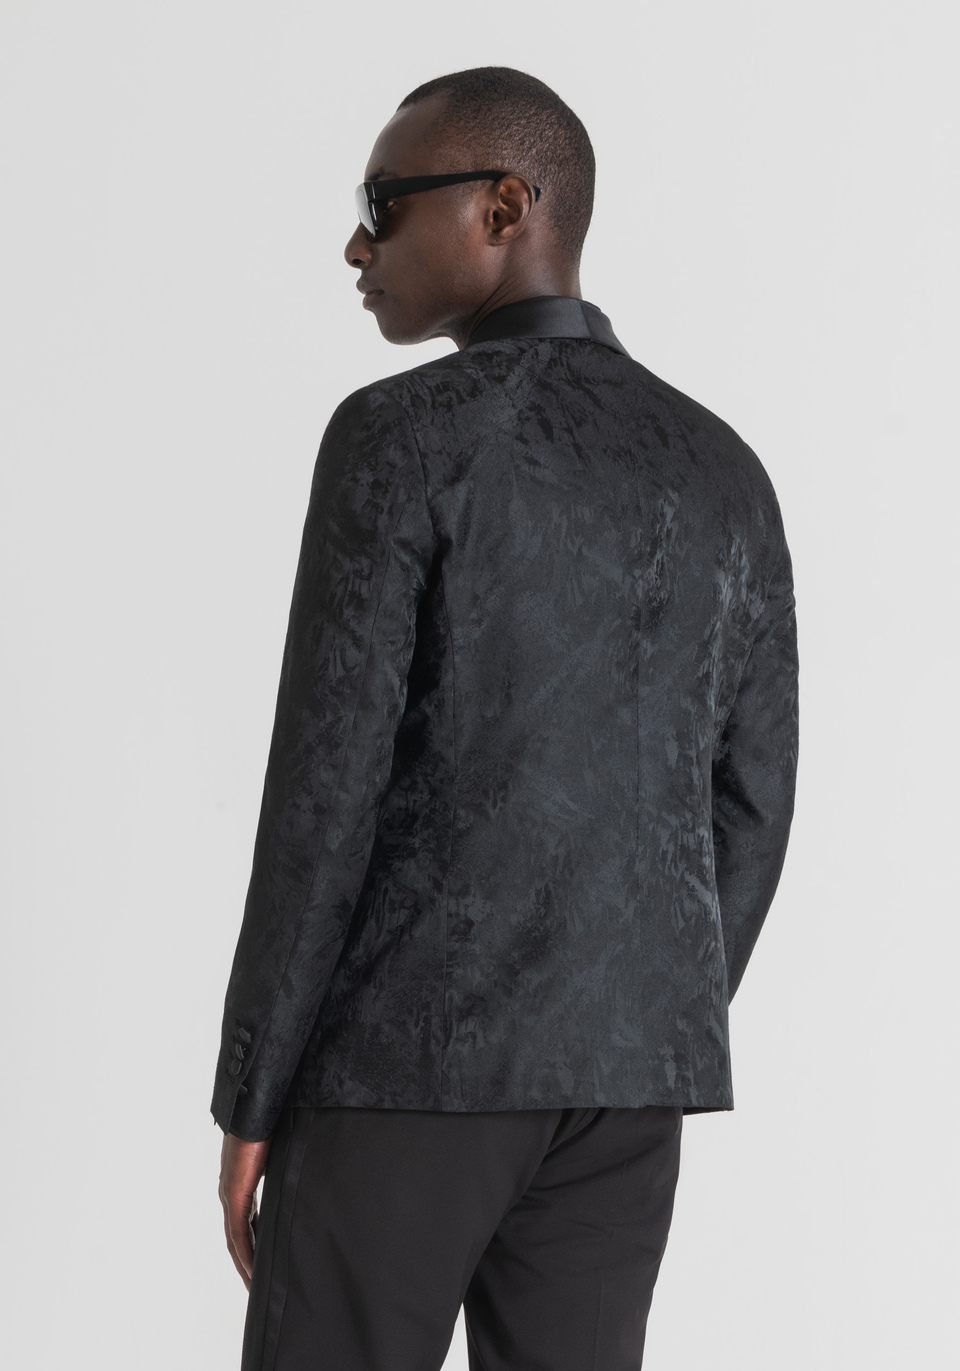 SLIM-FIT “BLANCHE” JACKET IN A JACQUARD-PATTERNED FABRIC - Antony Morato Online Shop